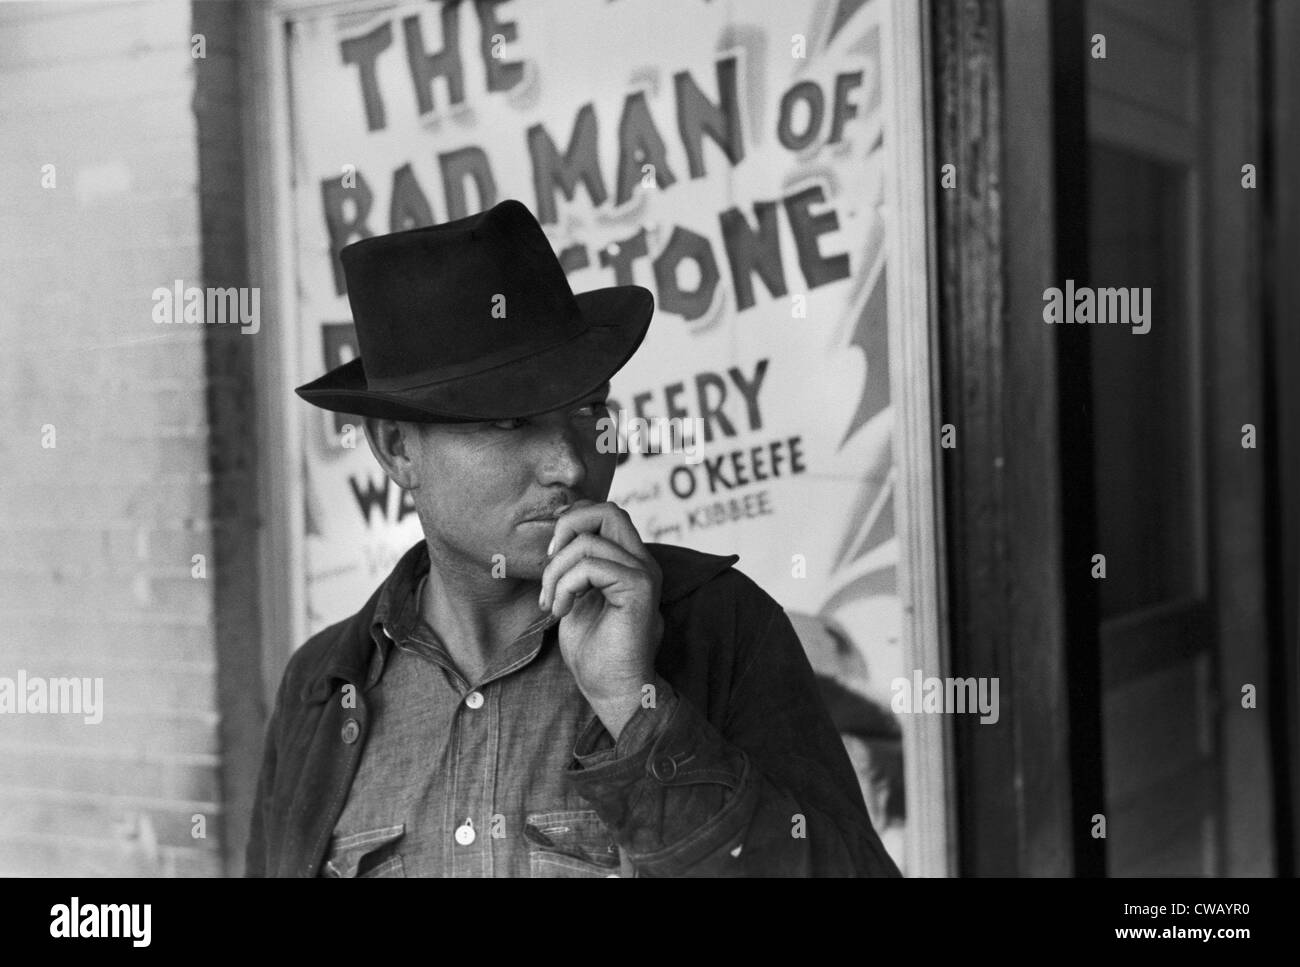 Man in front of a movie theater playing THE BAD MAN OF BRIMSTONE, Waco, Texas, photograph by Lee Russell, 1939. Stock Photo